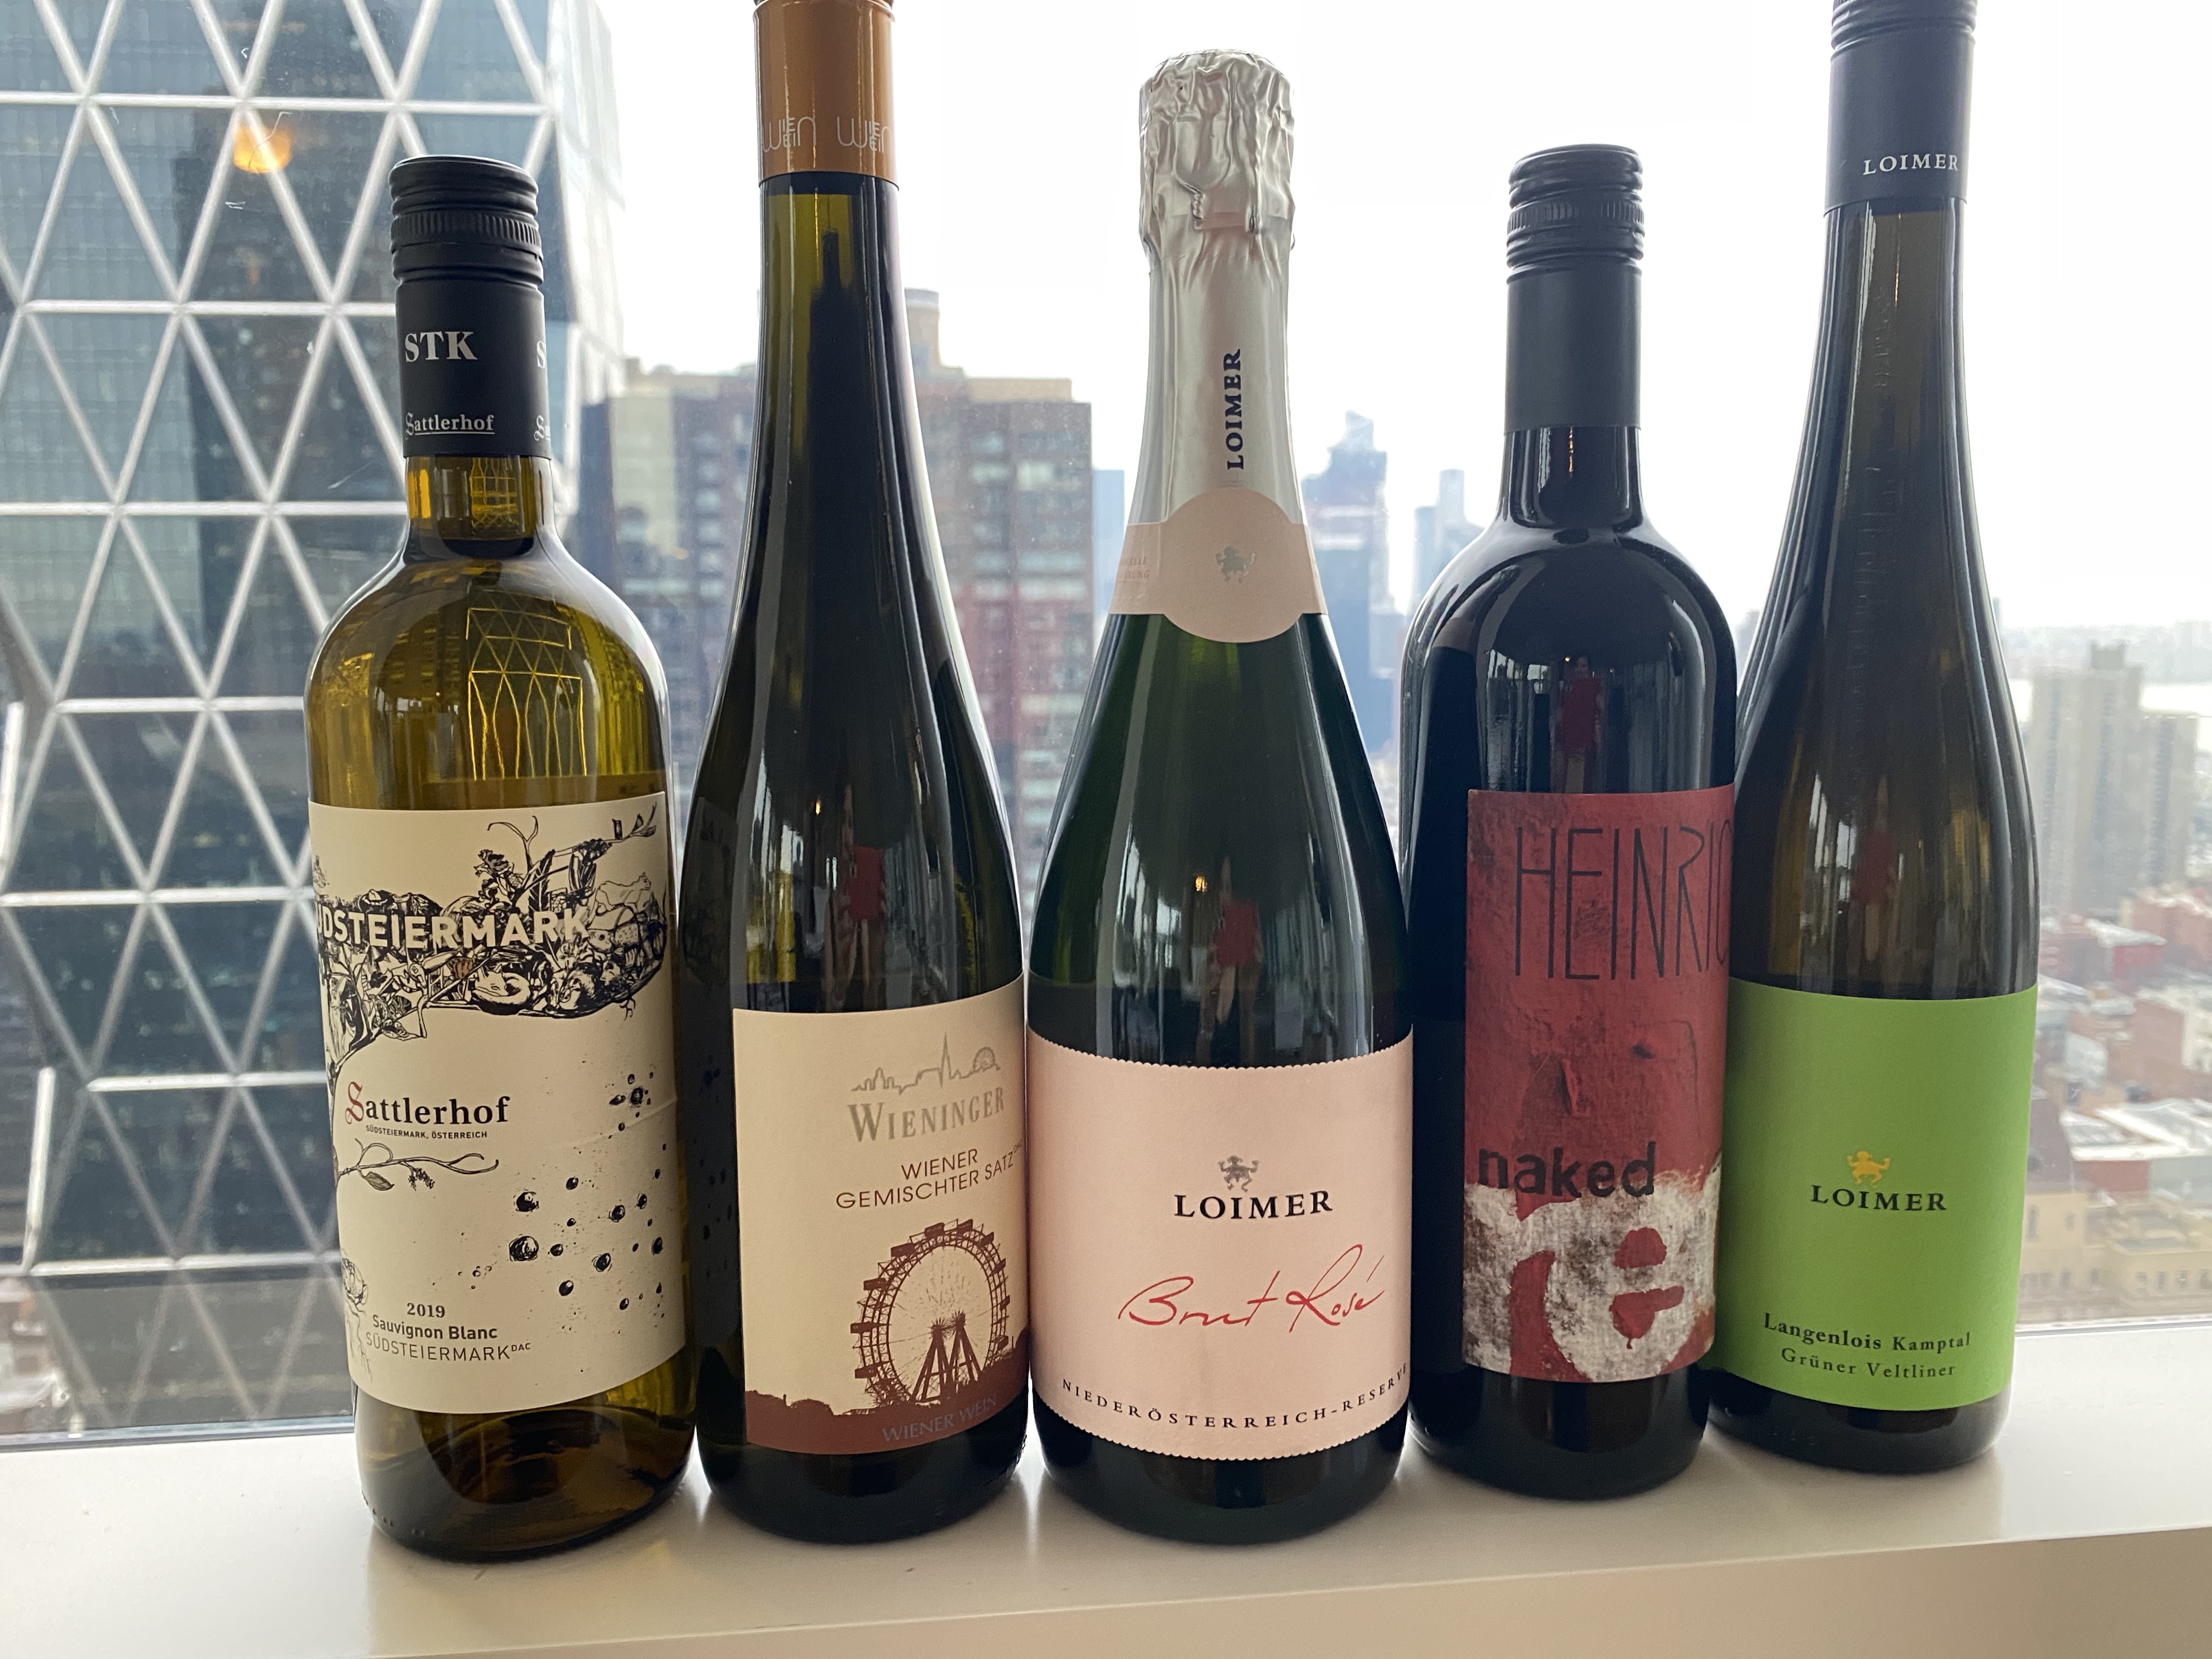 Winebow Collection of Respekt Austrian Wines